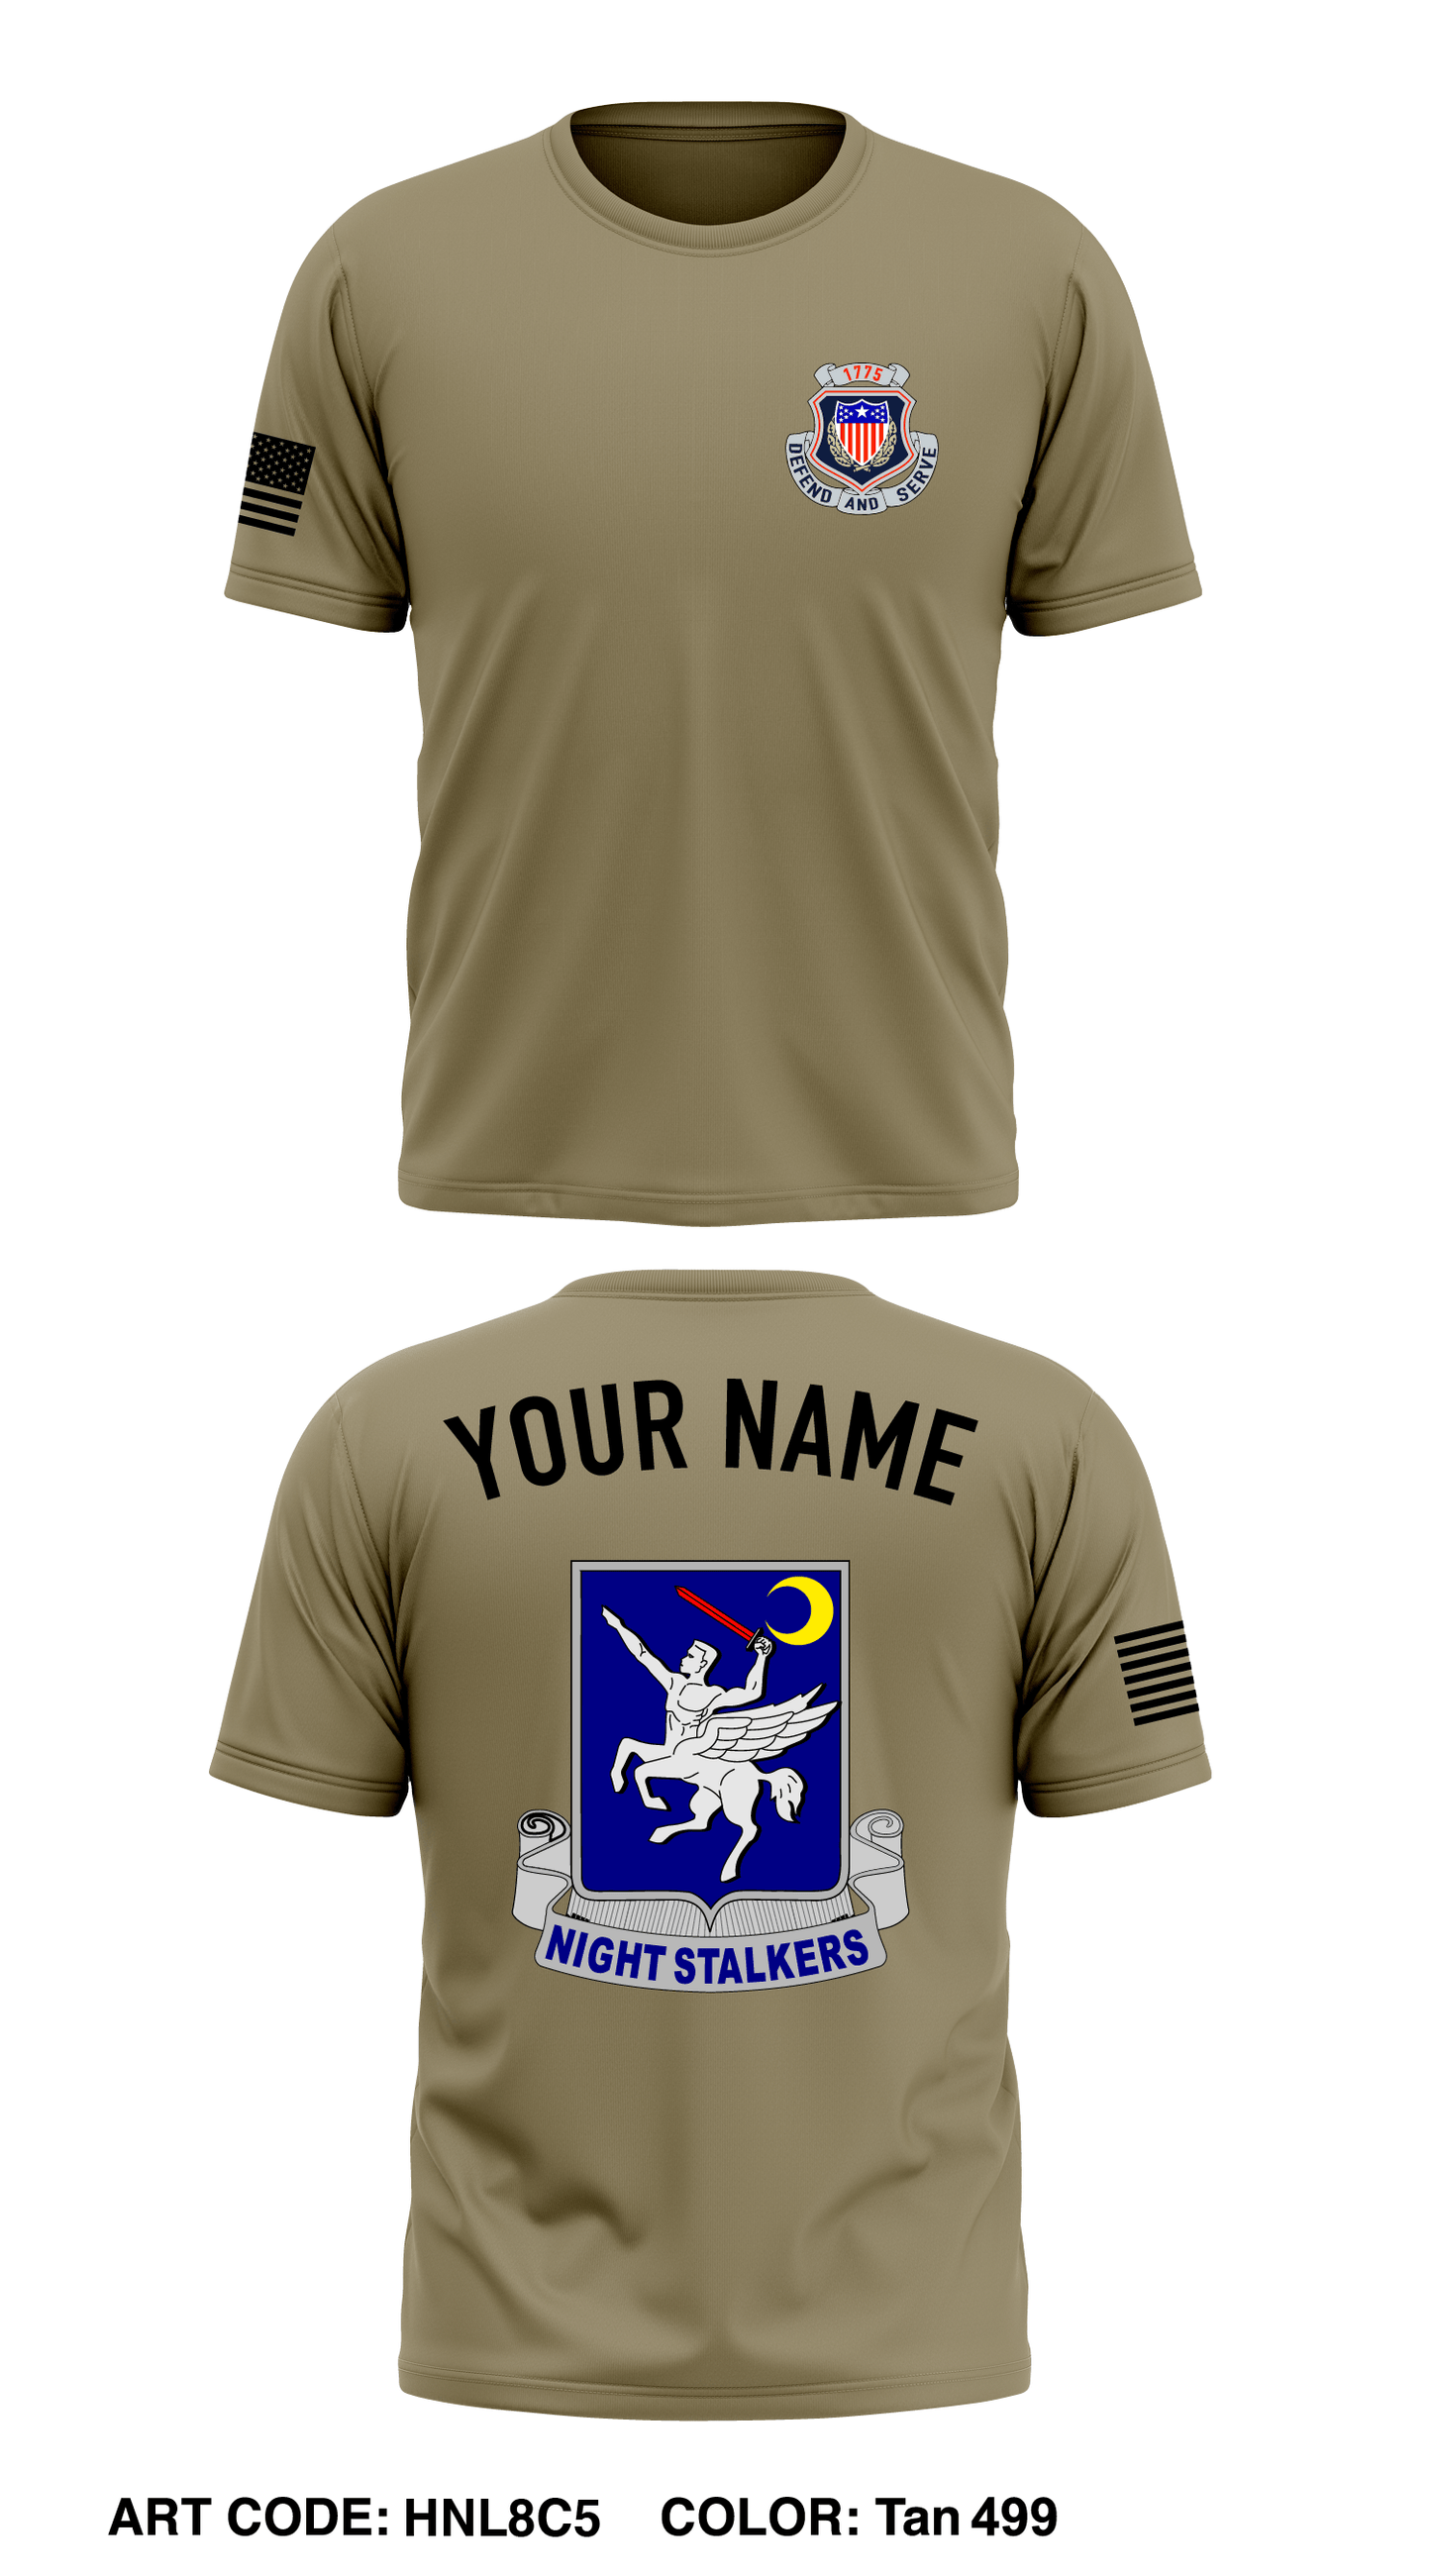 HHC, 160th Special Operation Aviation Regiment (Airborne) Store 1 Core Men's SS Performance Tee - HNL8C5